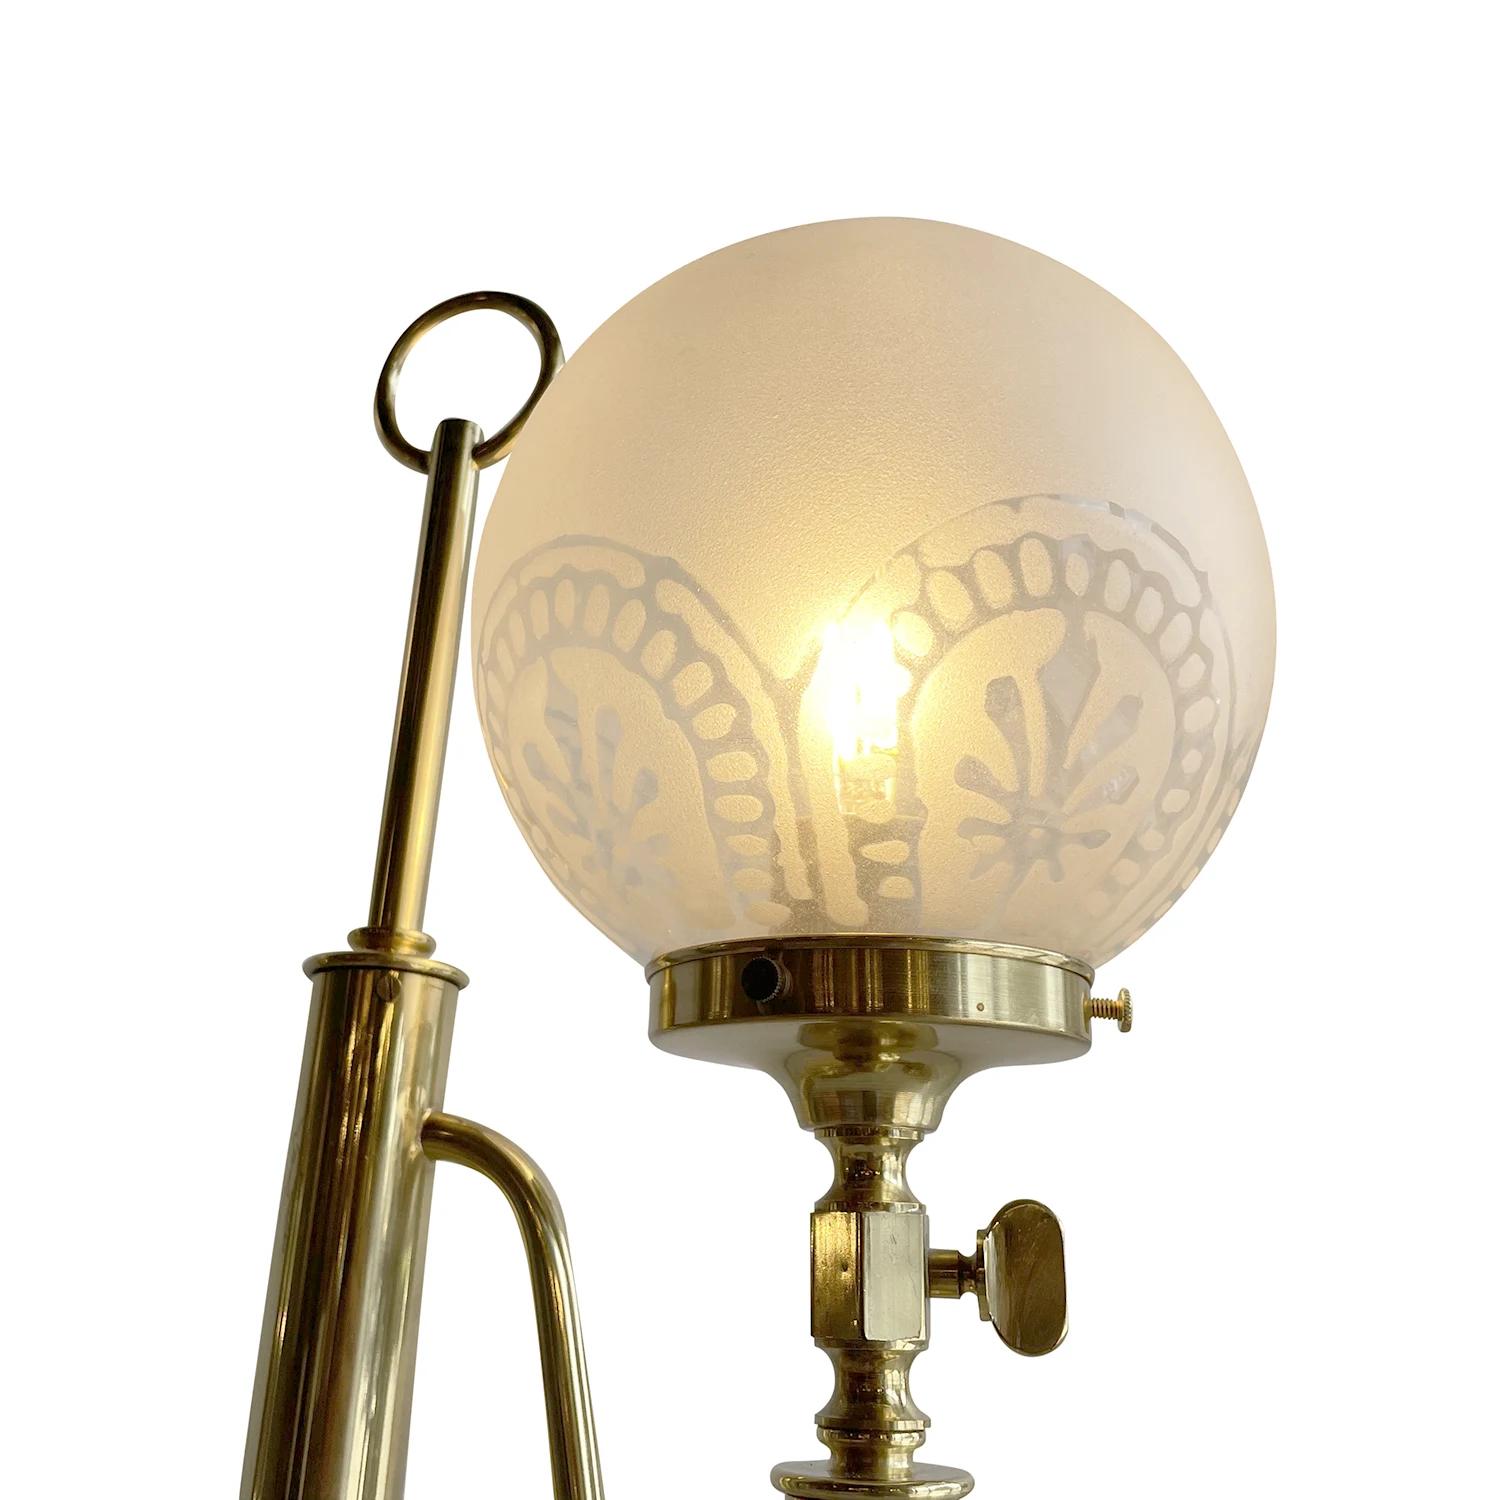 20th Century Swedish Örsjö Polished Brass Table Lamp, Light by Helmer Andersson For Sale 2